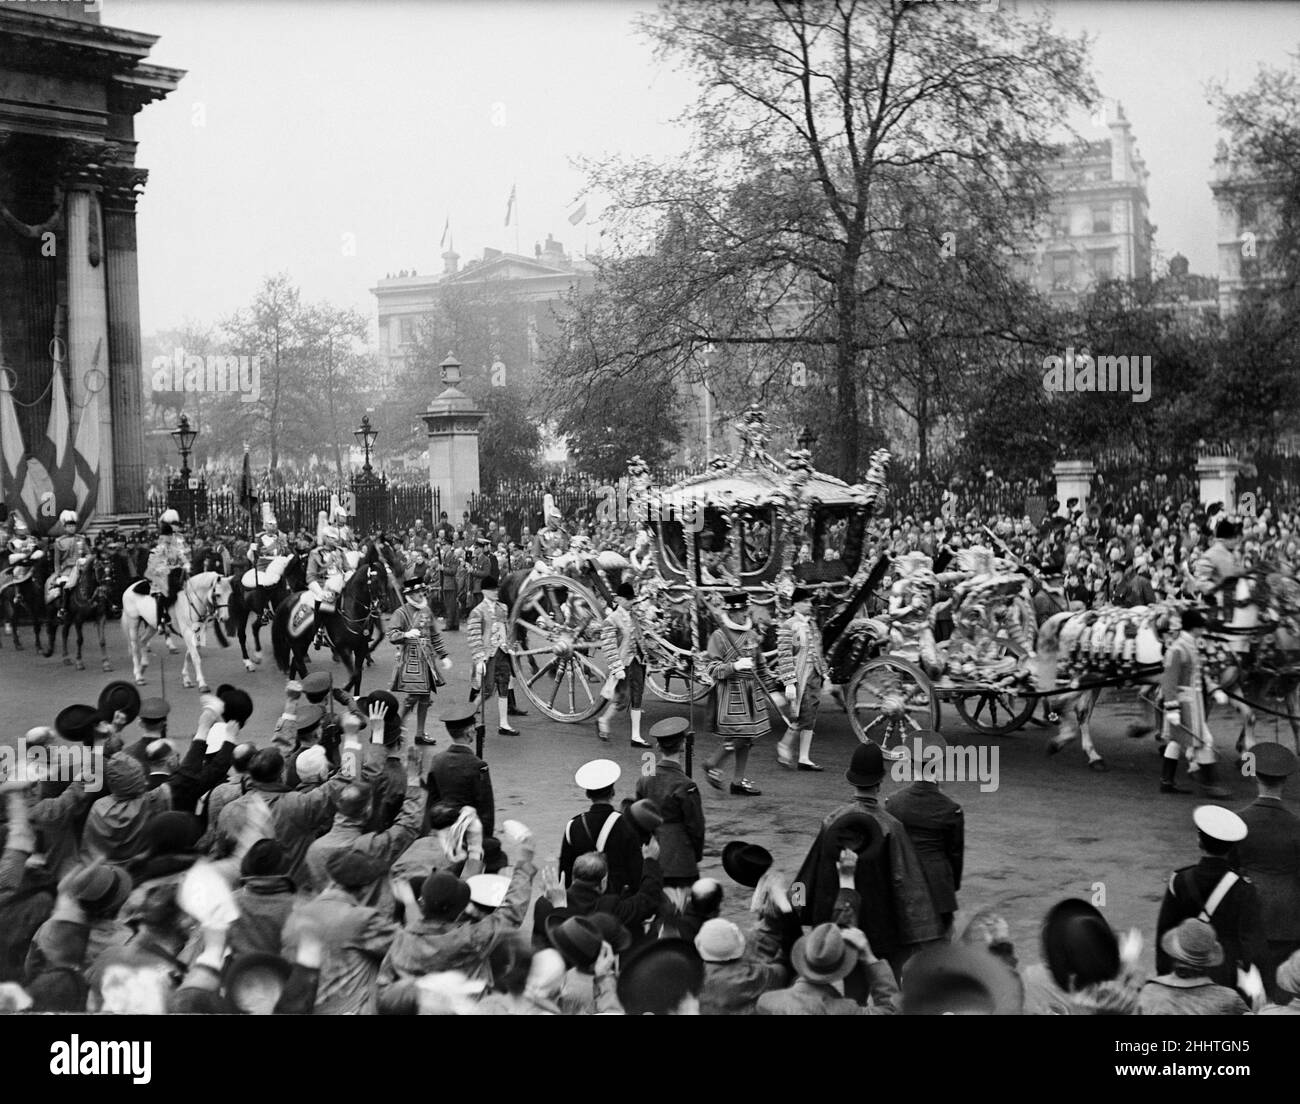 Coronation of King George VI. The golden state coach containing King George VI passes through Marble Arch on its return journey to Buckingham Palace as thousands of people cheer from the side of the road. 12th May 1937. Stock Photo